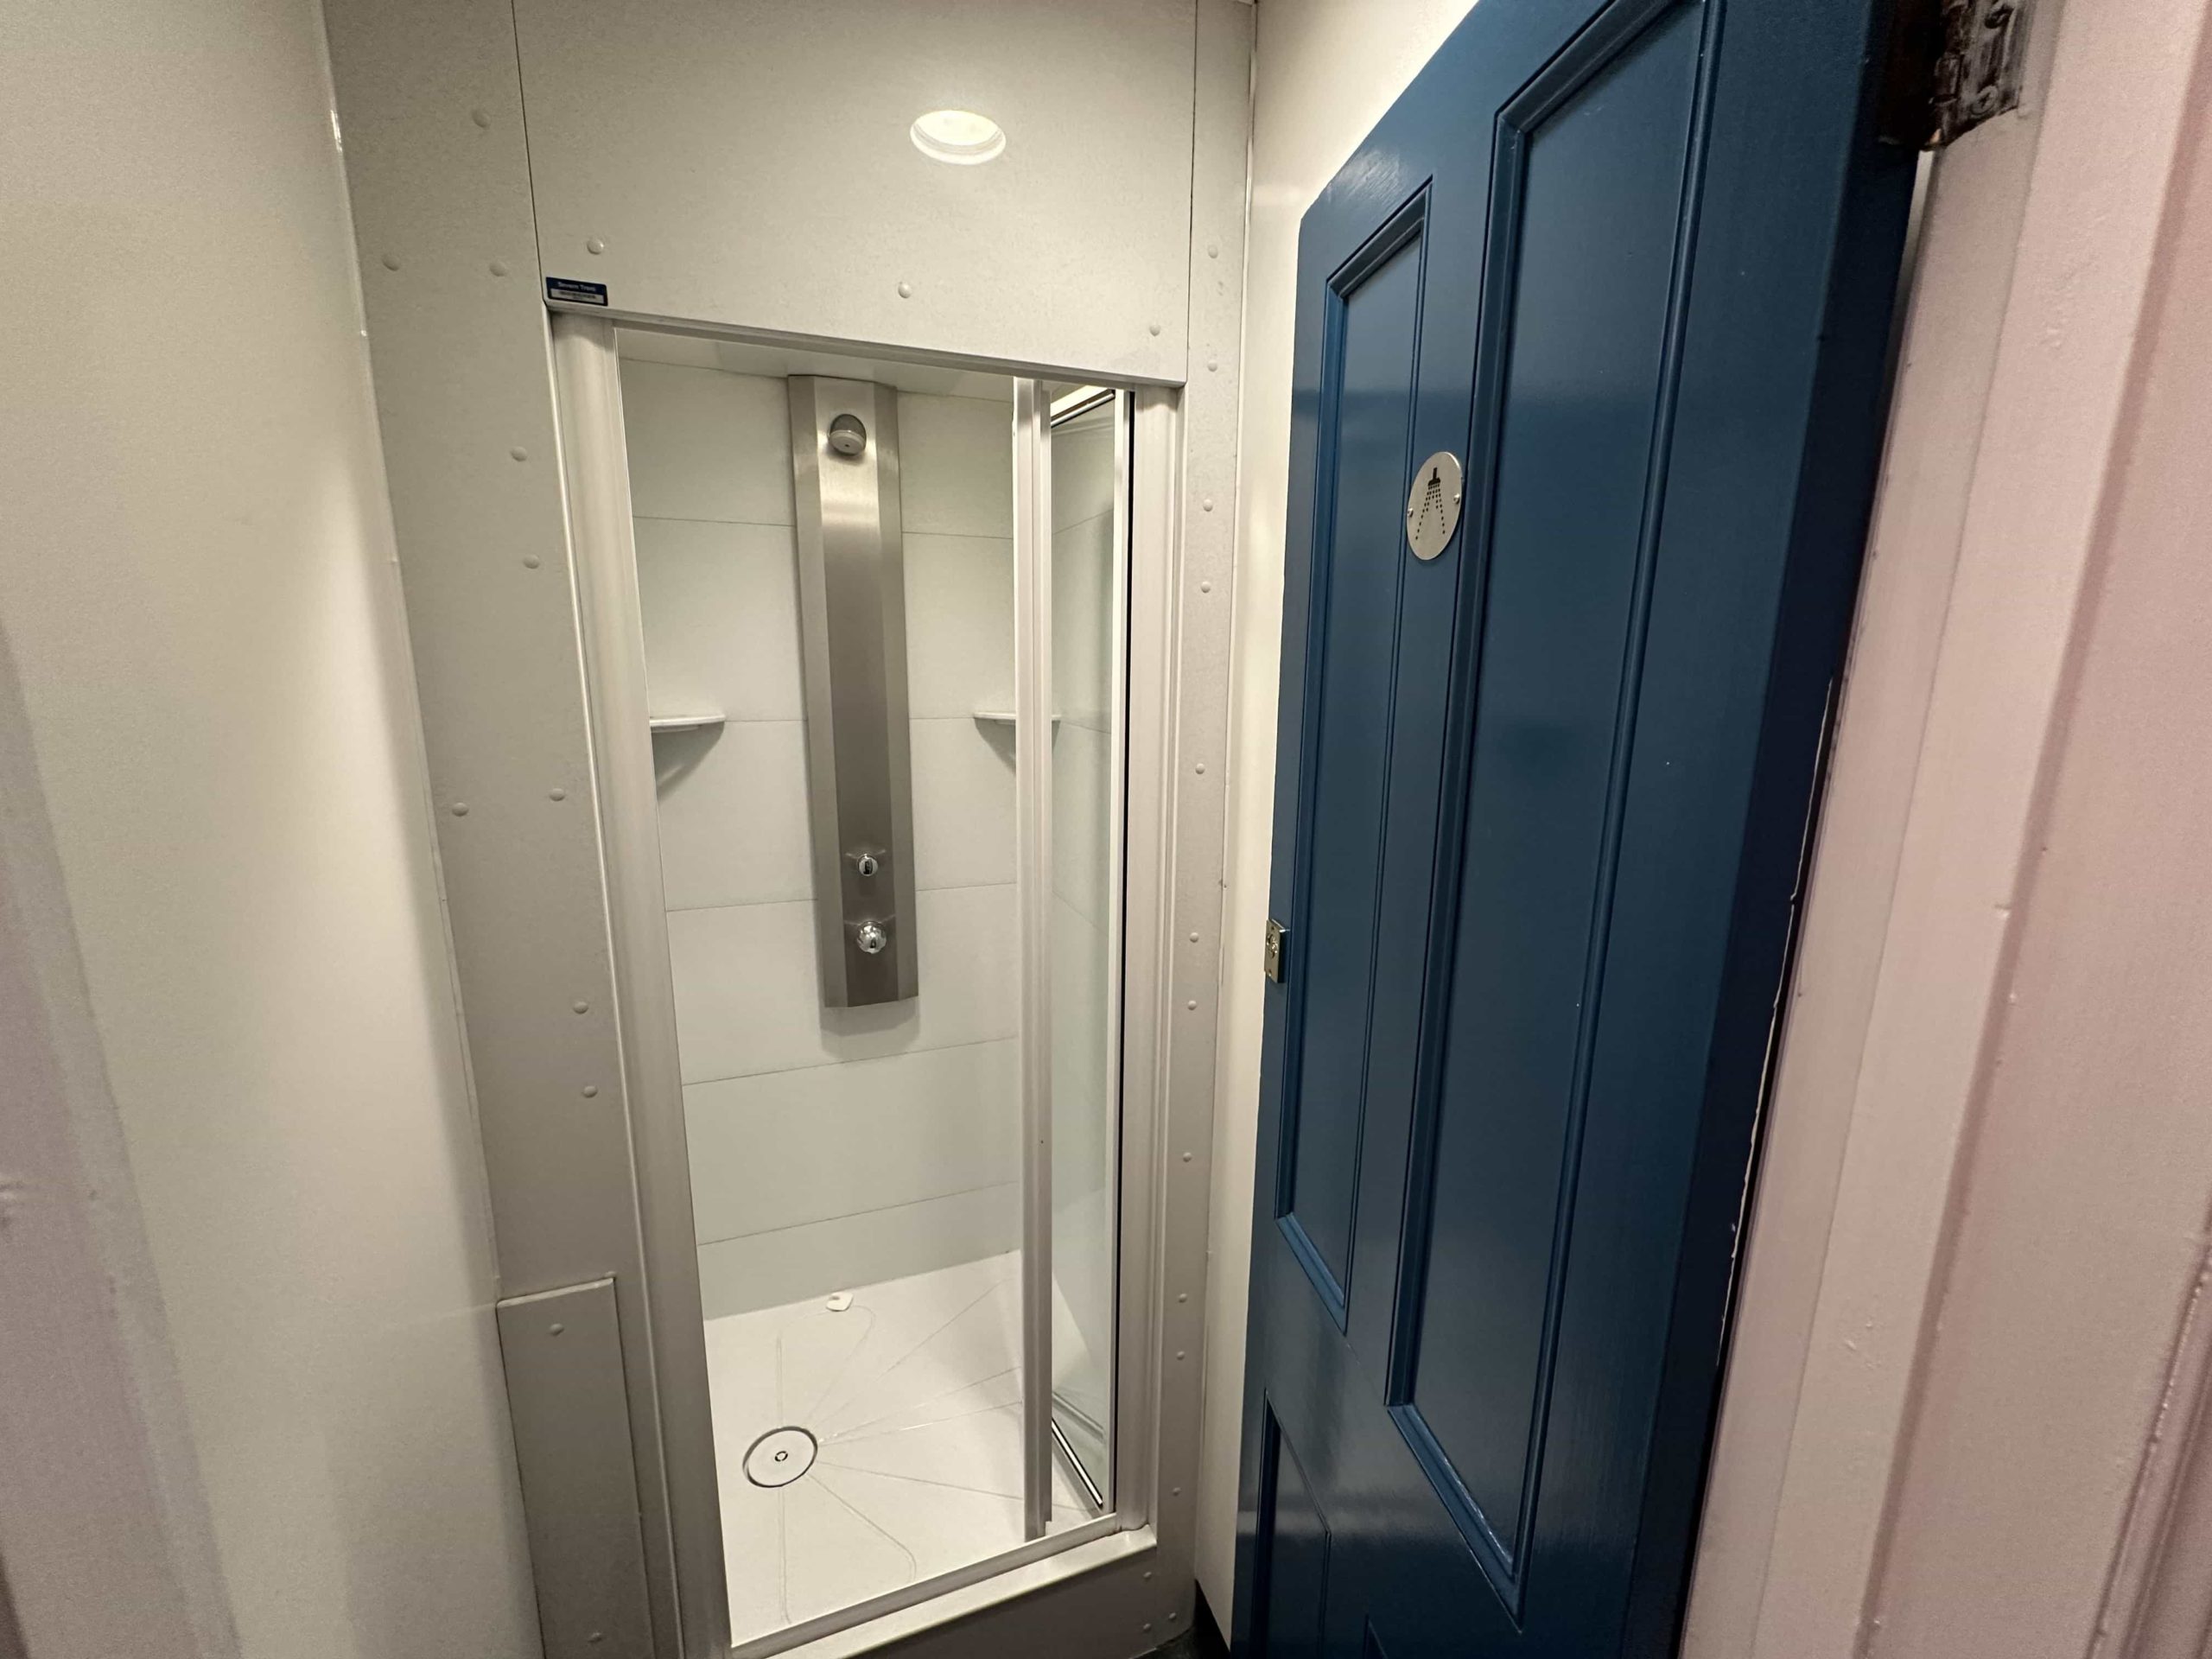 A dedicated shower room with a shower cubicle, and a small area to change